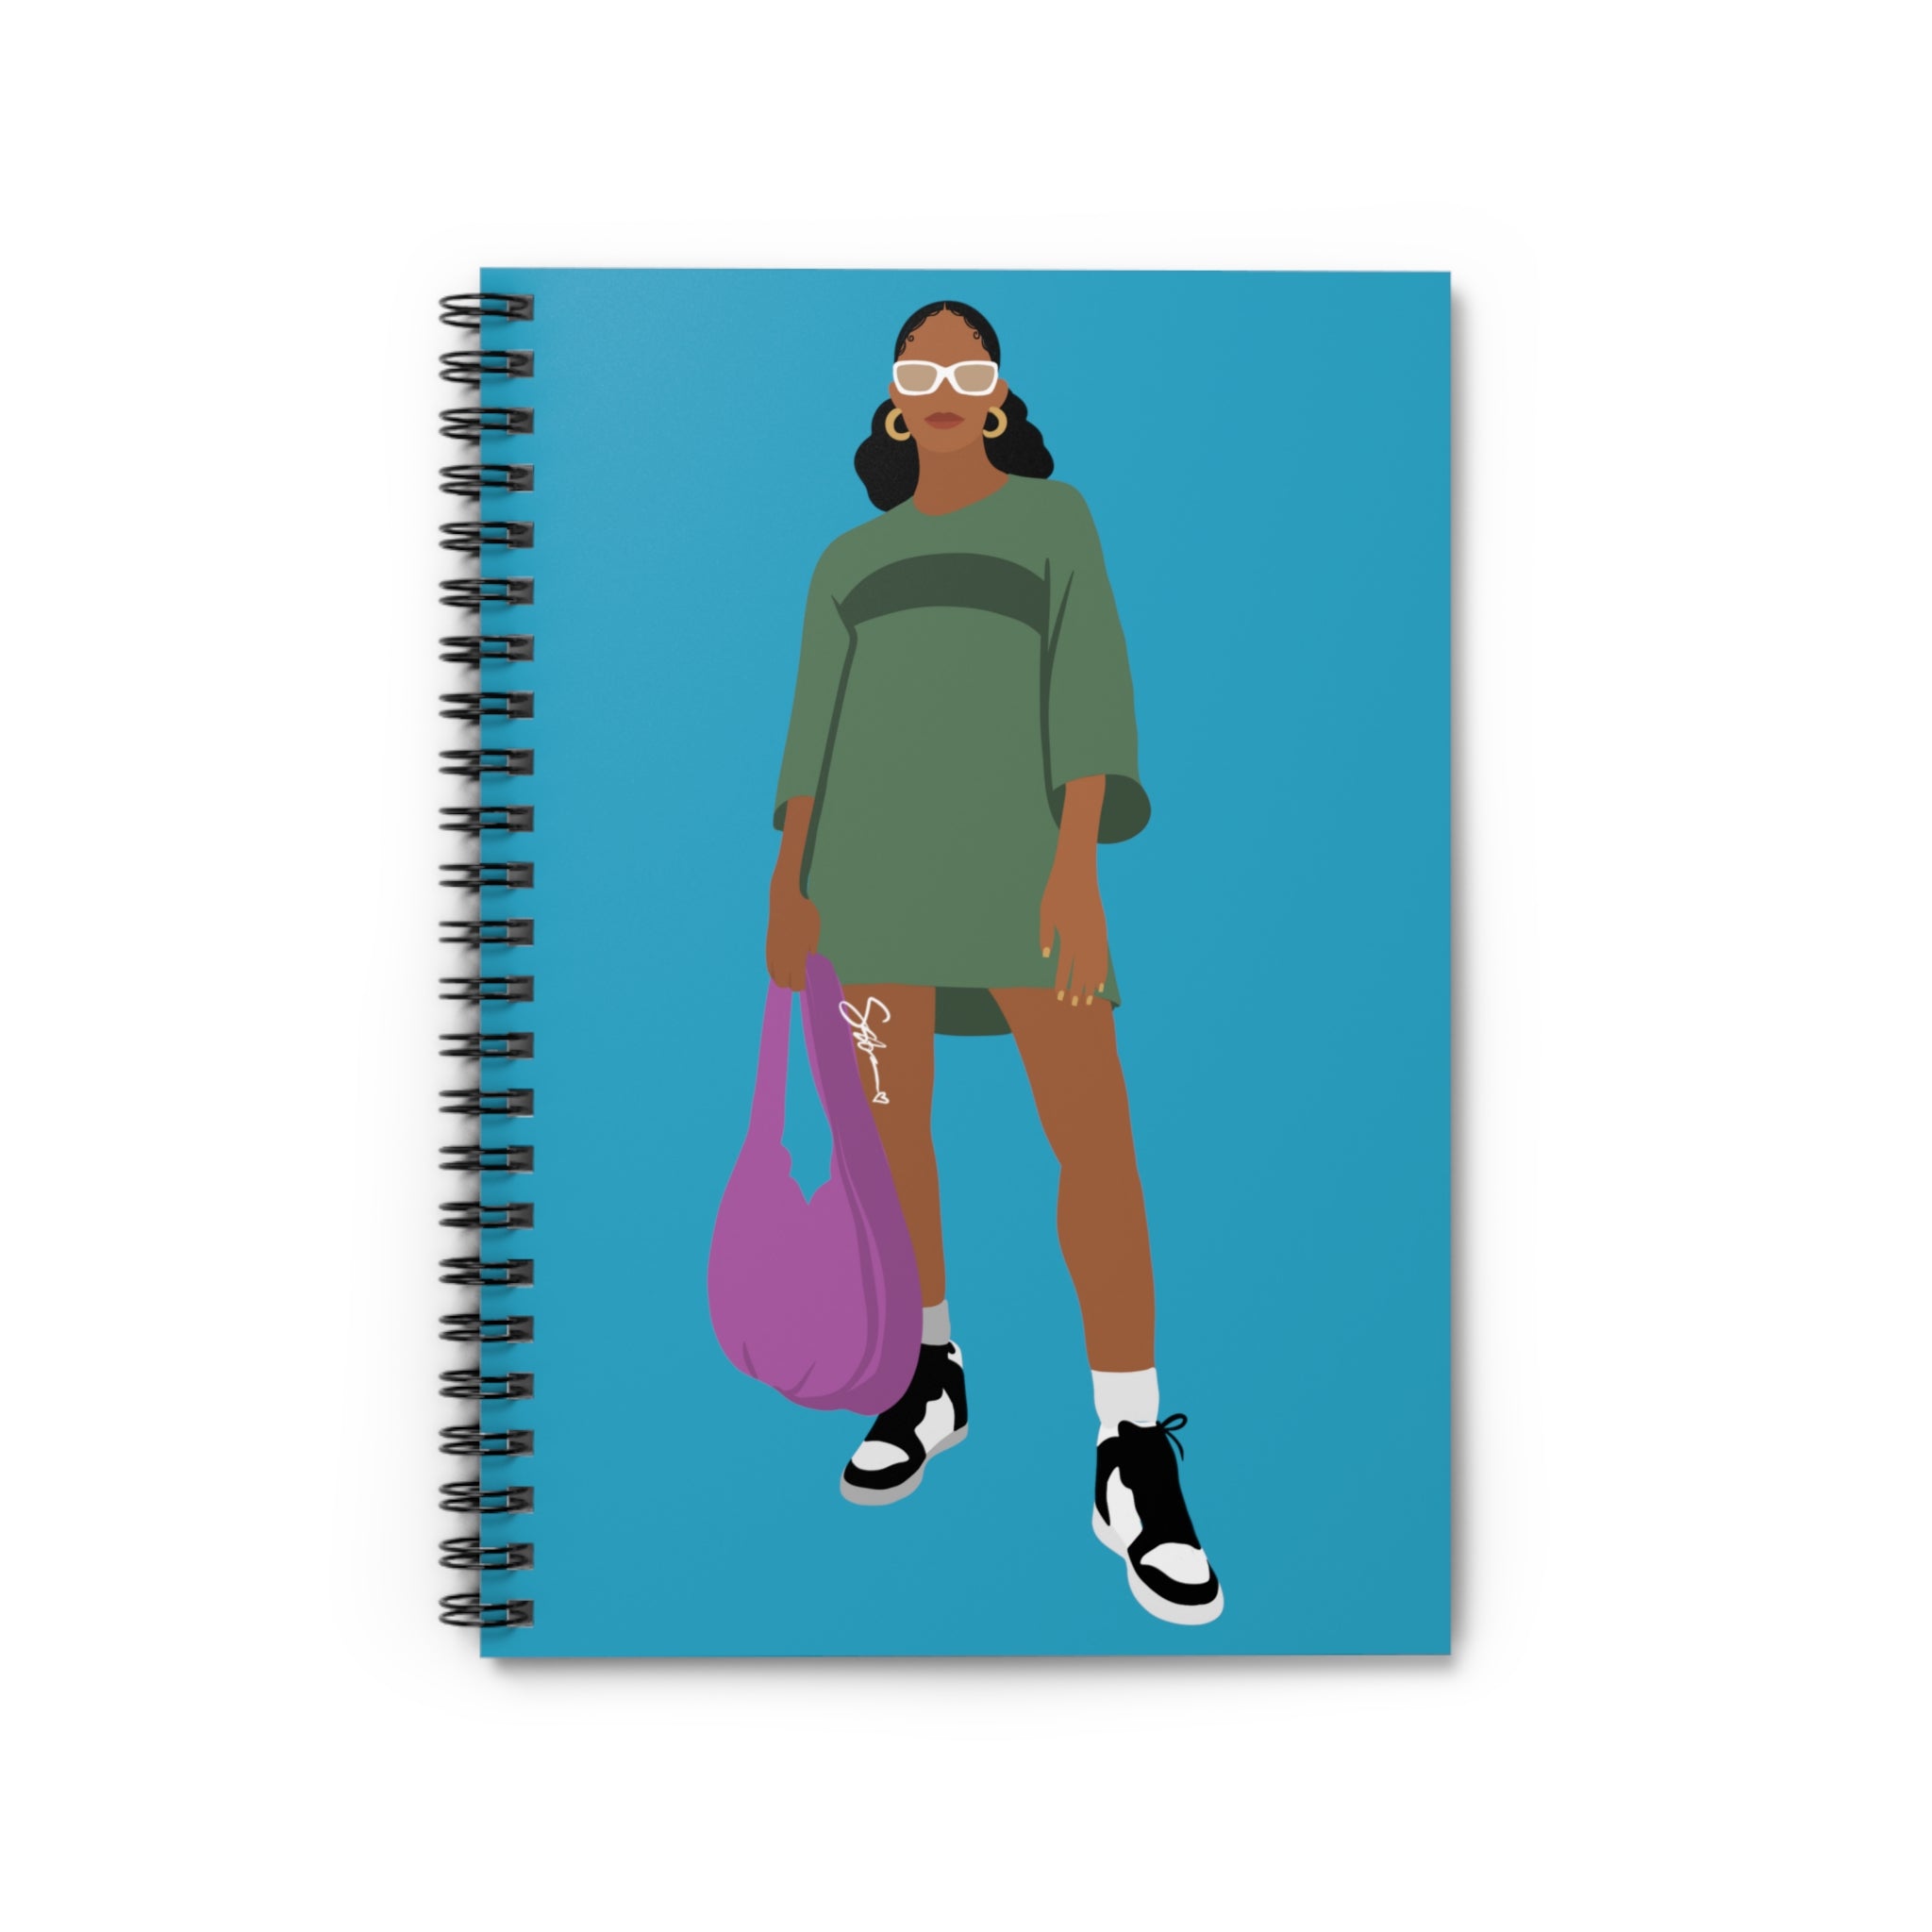 The Fashionista Women's Affirmations Journal